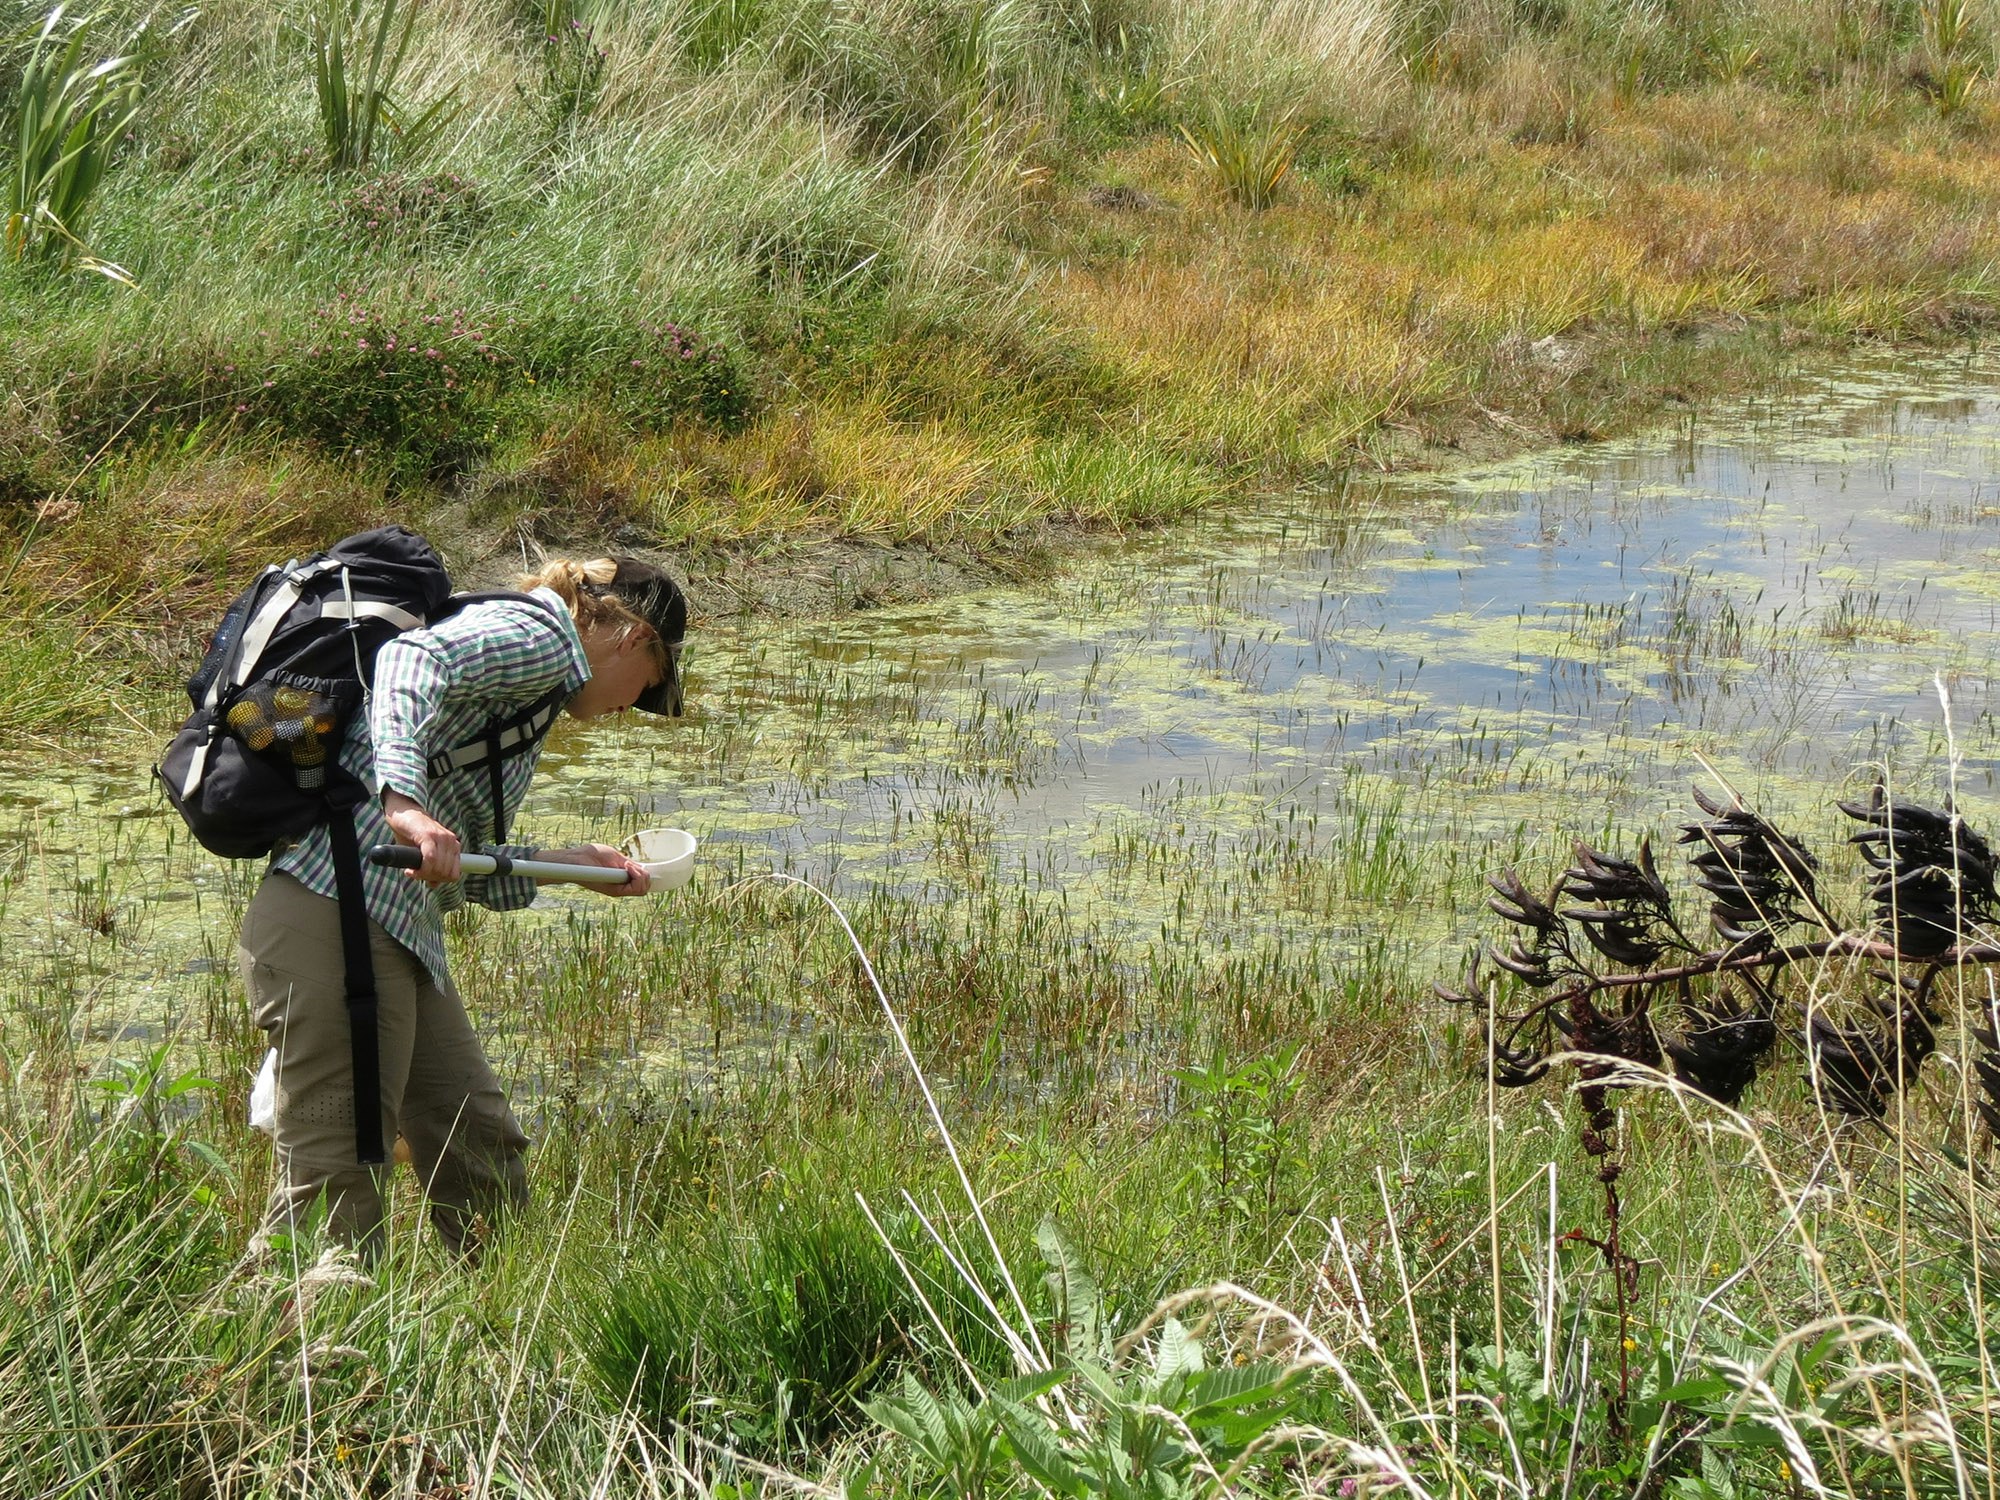 A woman standing in a swamp with a backpack on and a tool in her hands